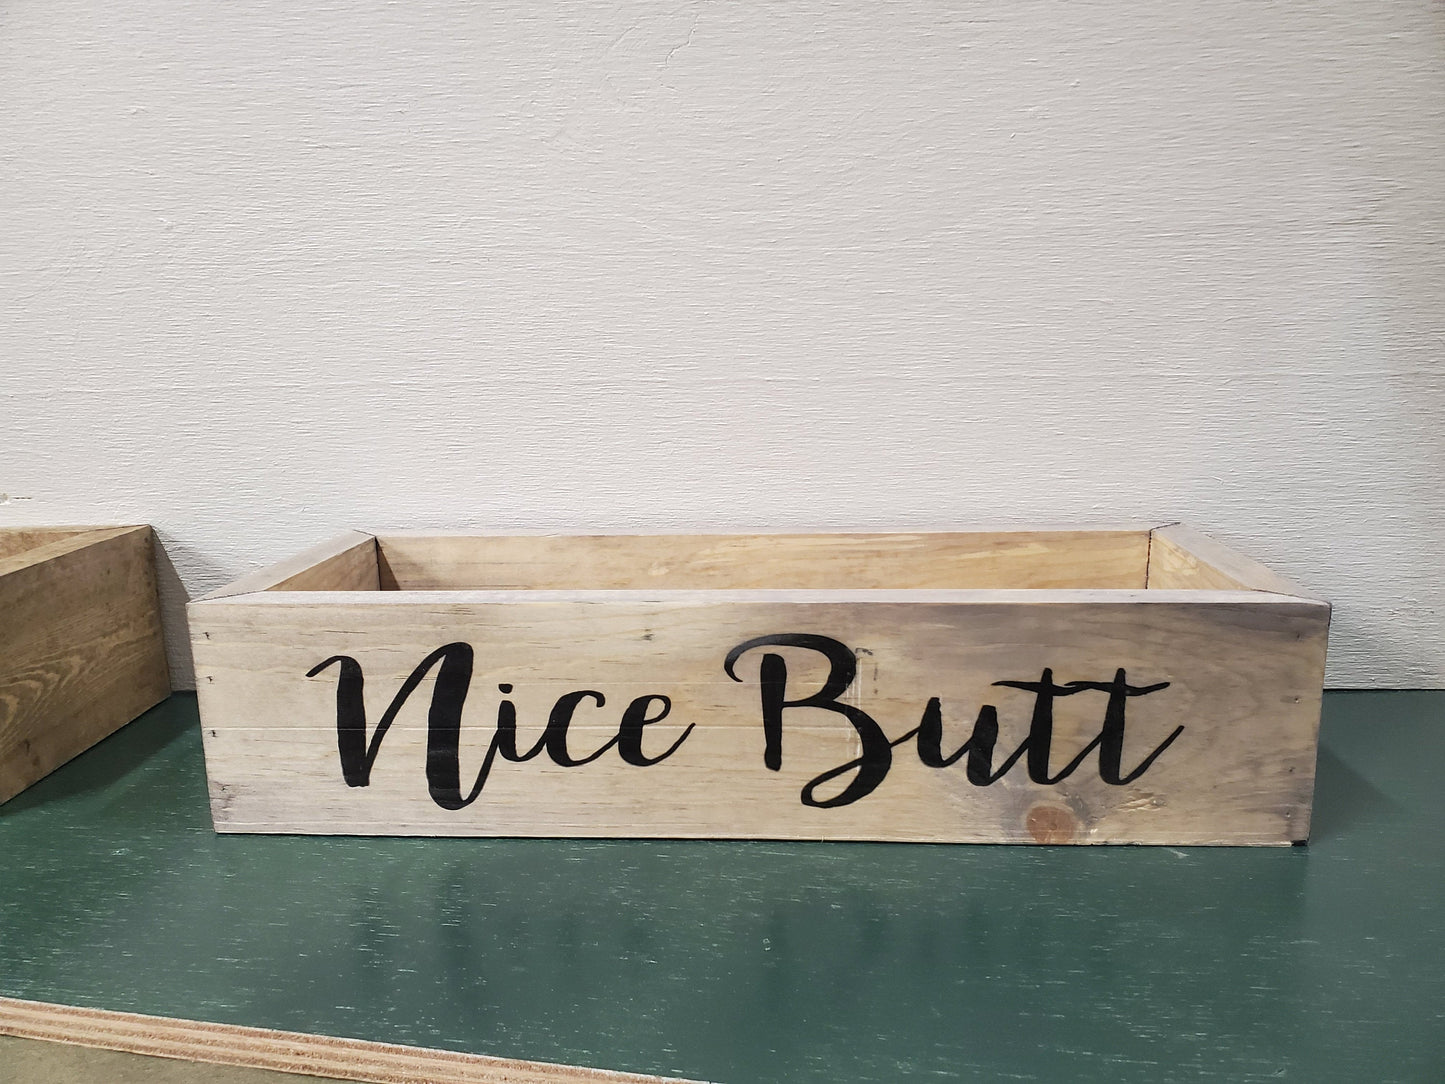 Toilet Paper Holder Wood Box Kitchen Island Box Wood Nice Butt Custom Personalize Family Name Handmade Country Primitive Rustic Plant Box